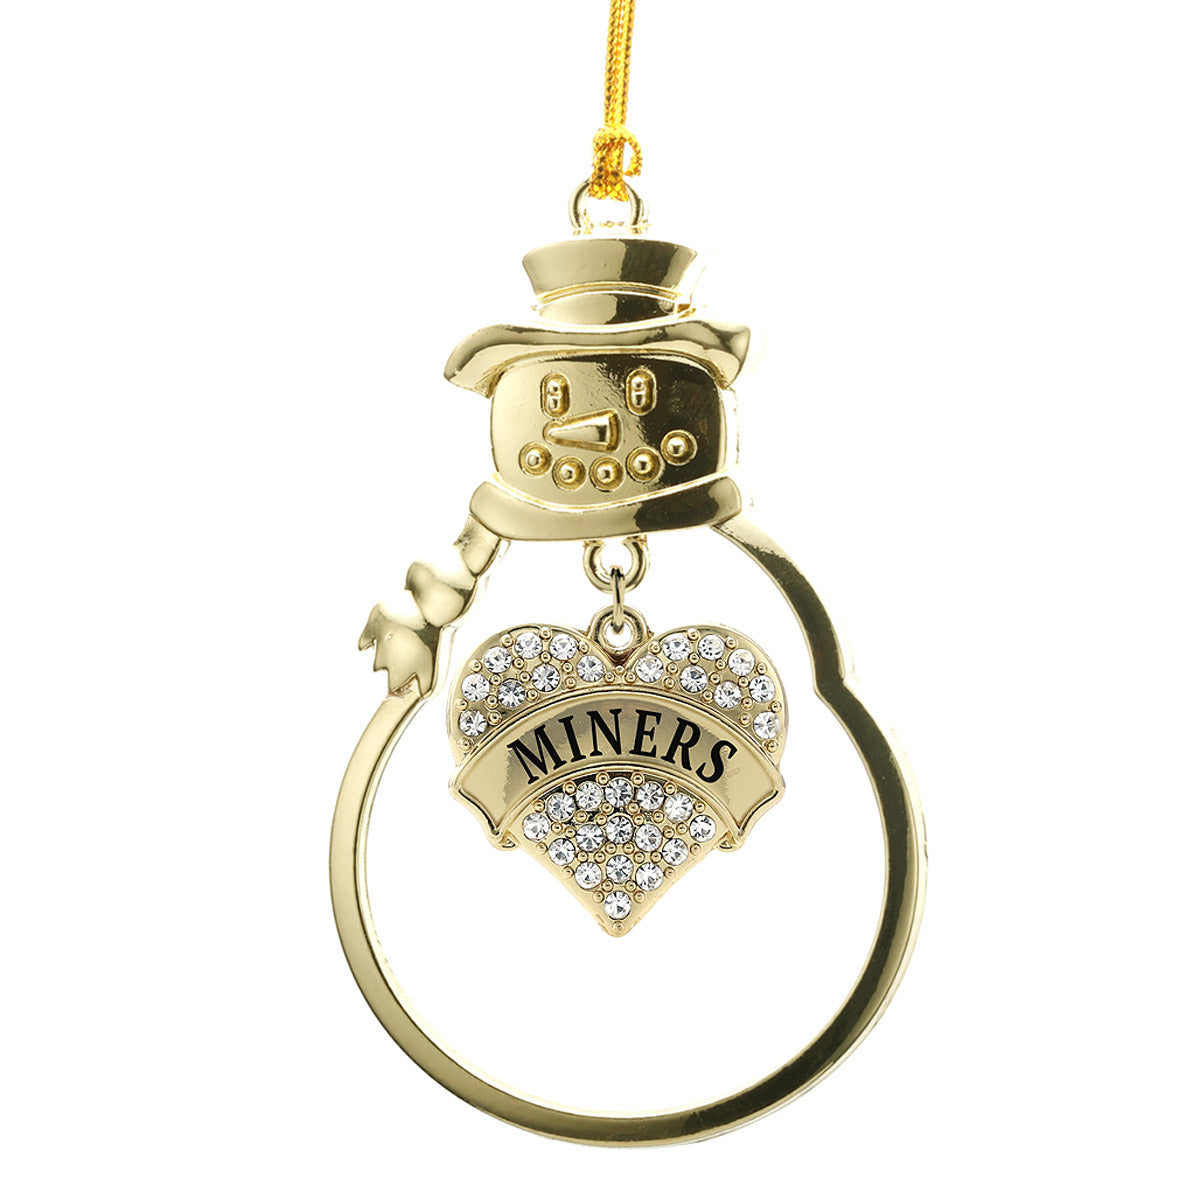 Gold Miners Pave Heart Charm Snowman Ornament